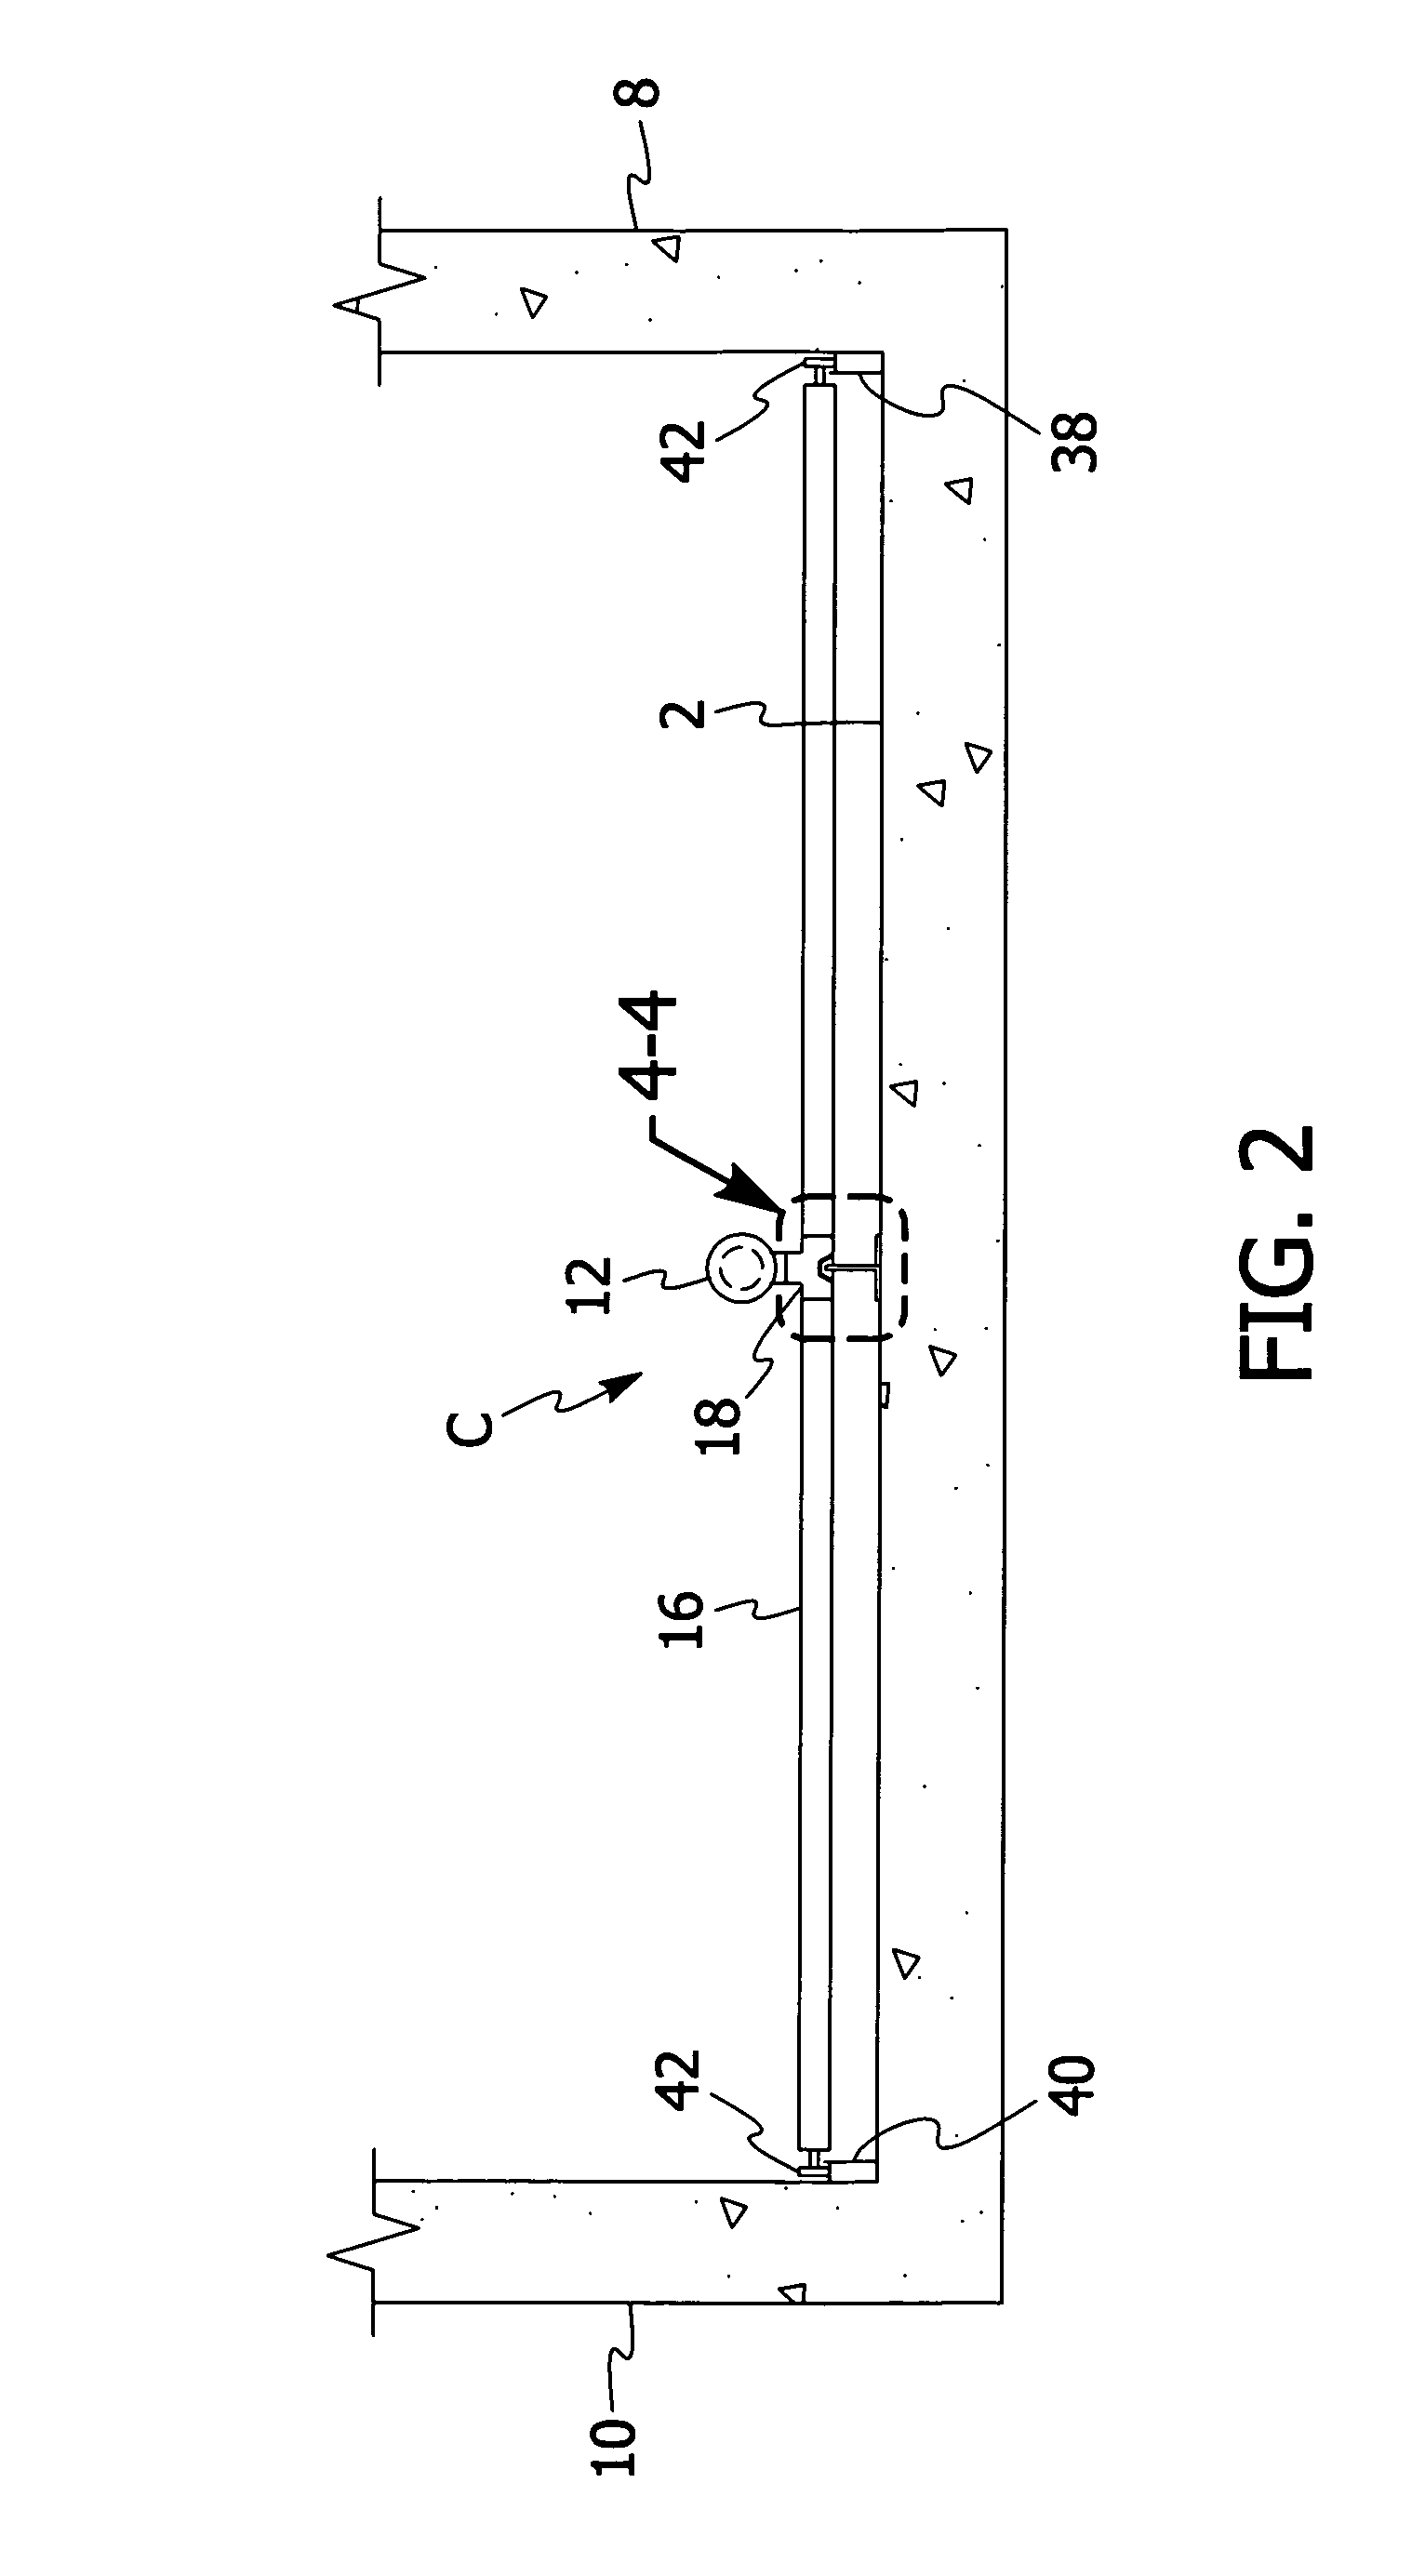 Apparatus and method for removing materials from a material collection container